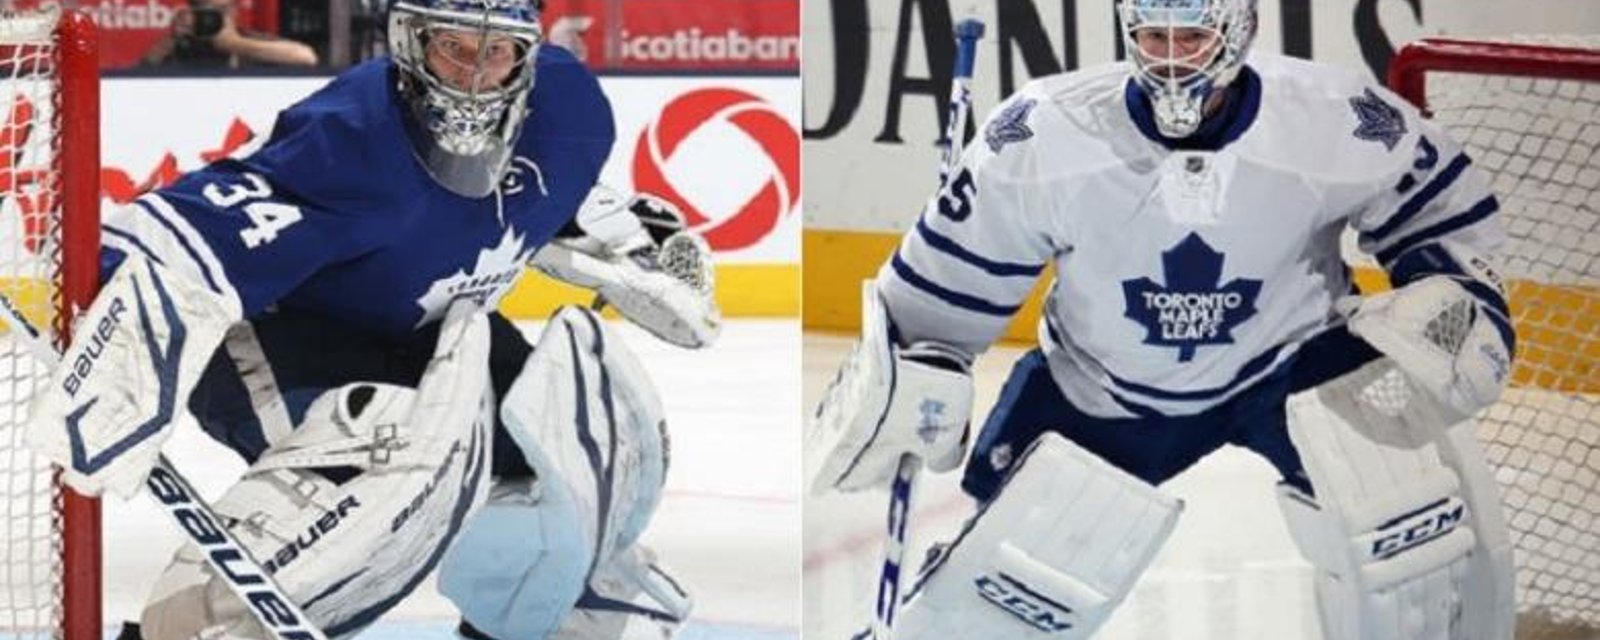 Goaltending controversy in Toronto once again.